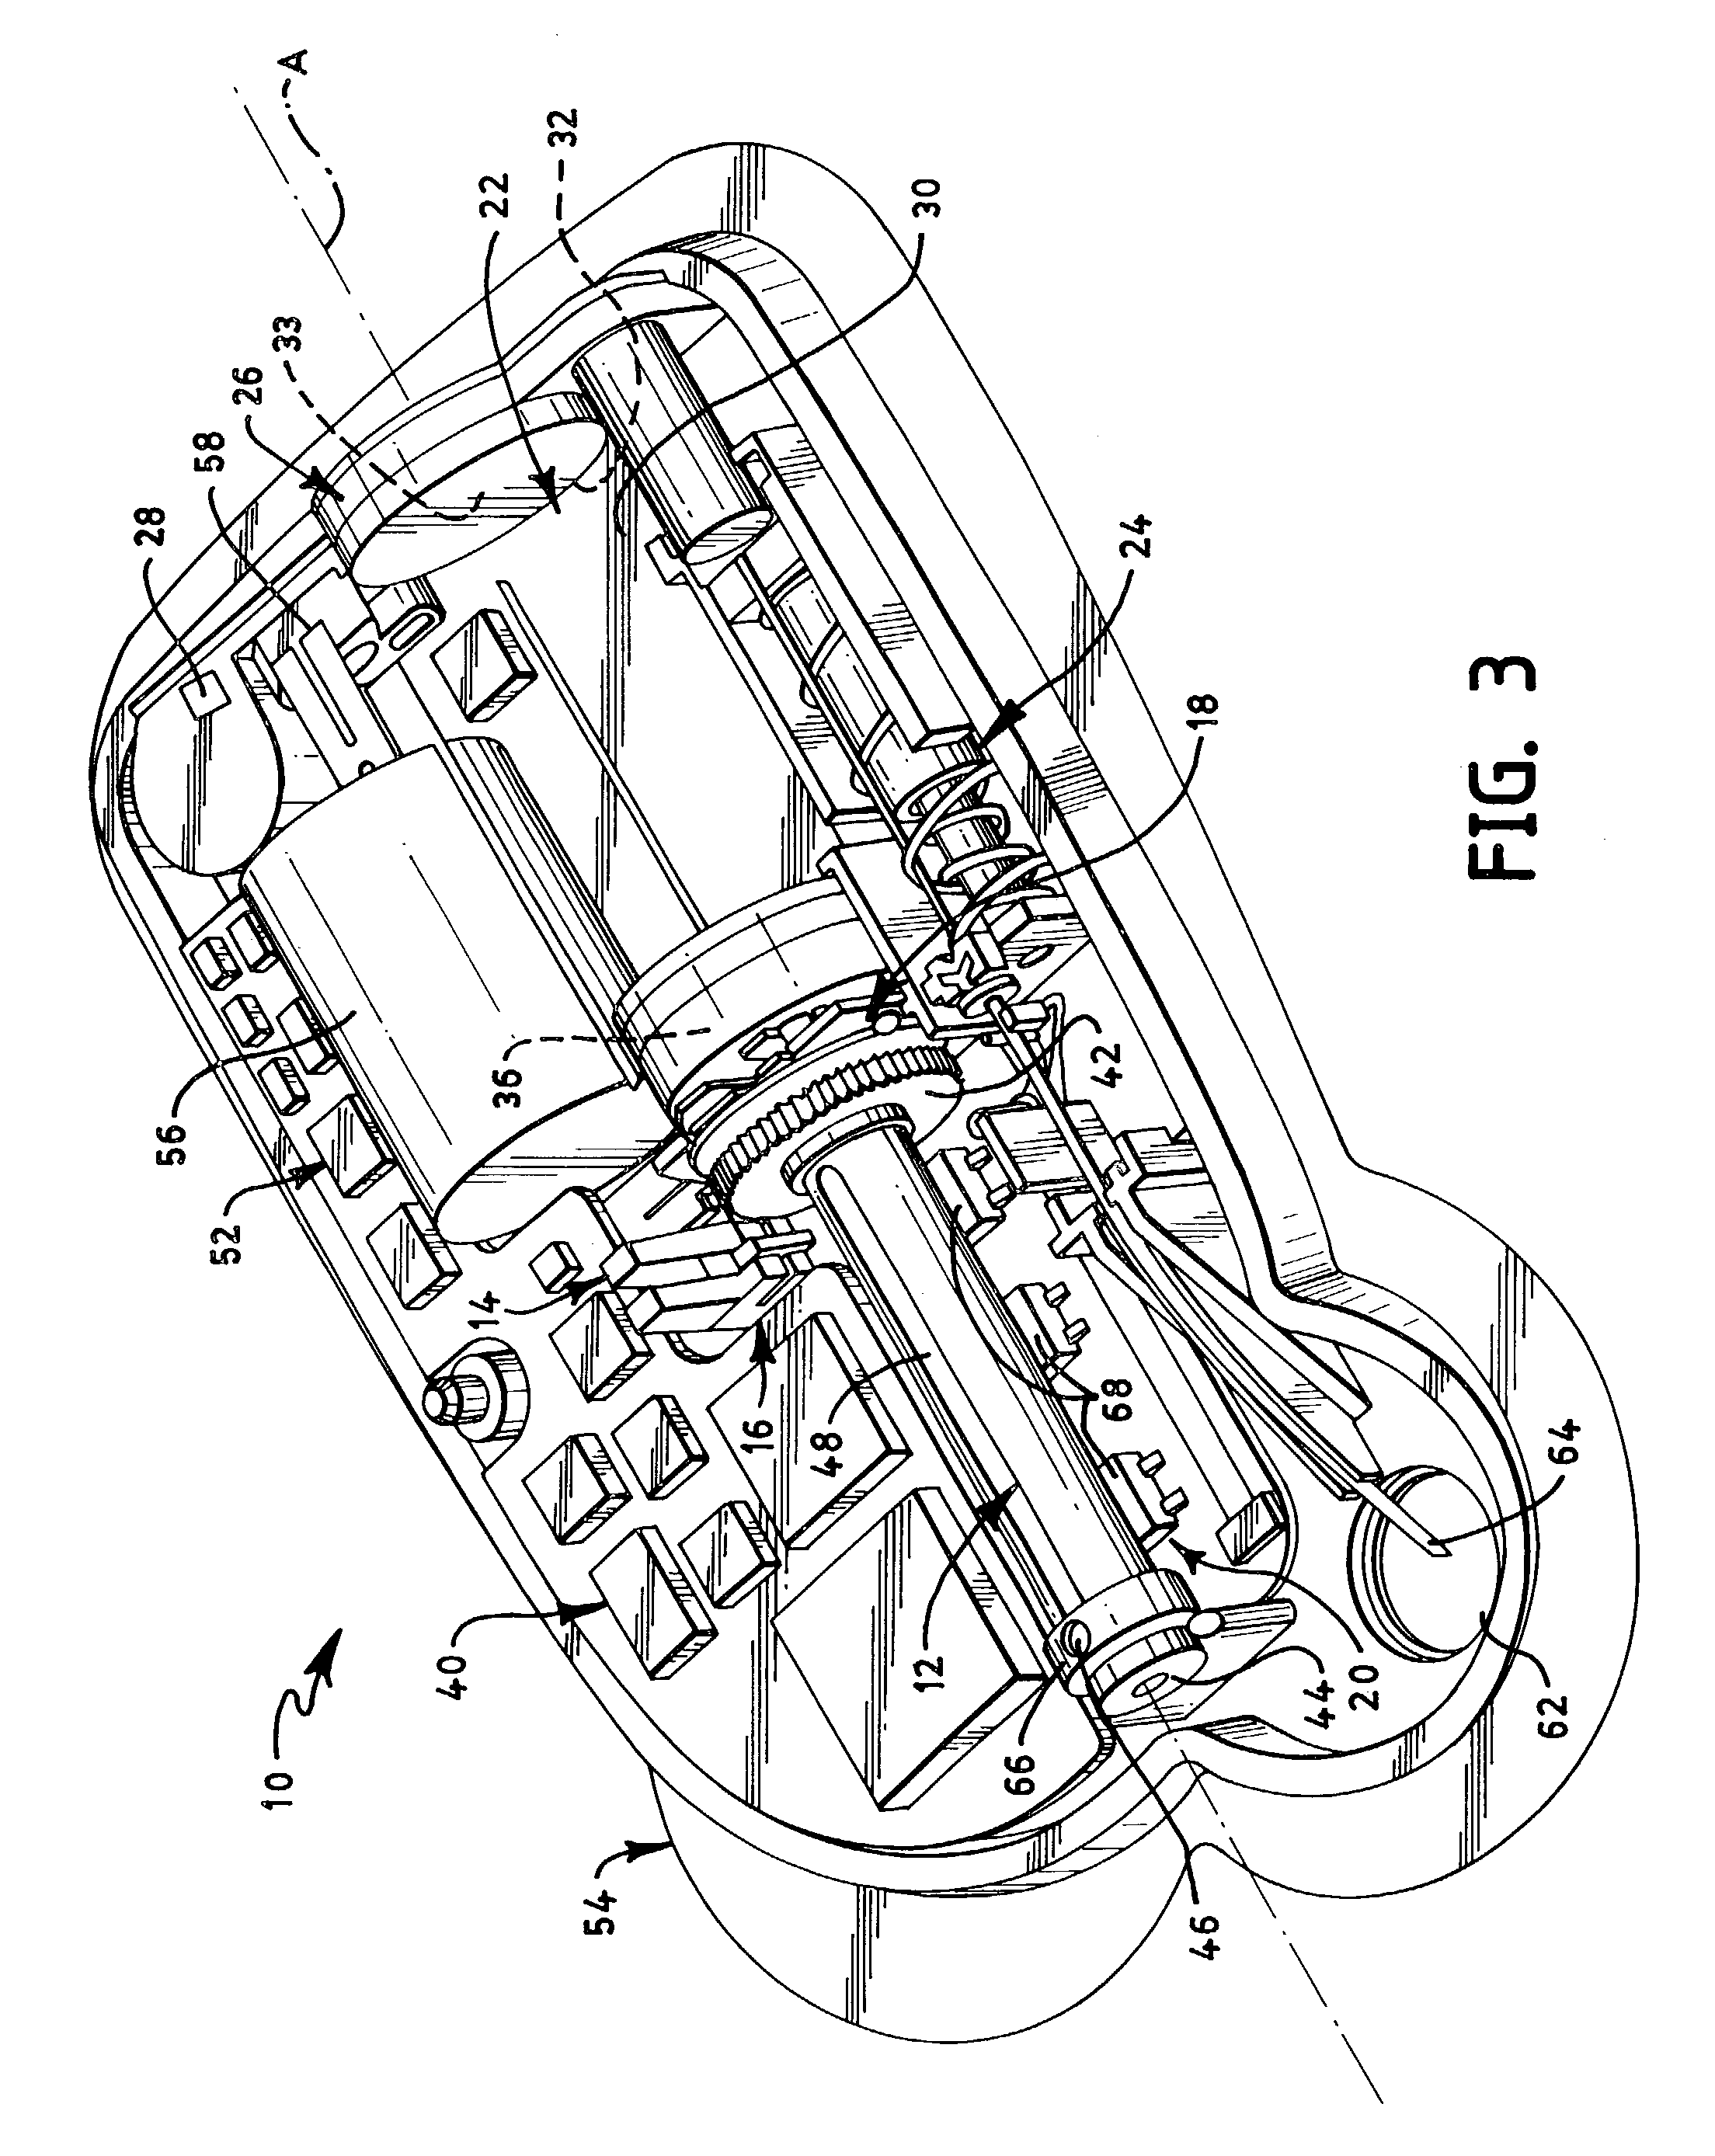 Dispenser components and methods for patient infusion device